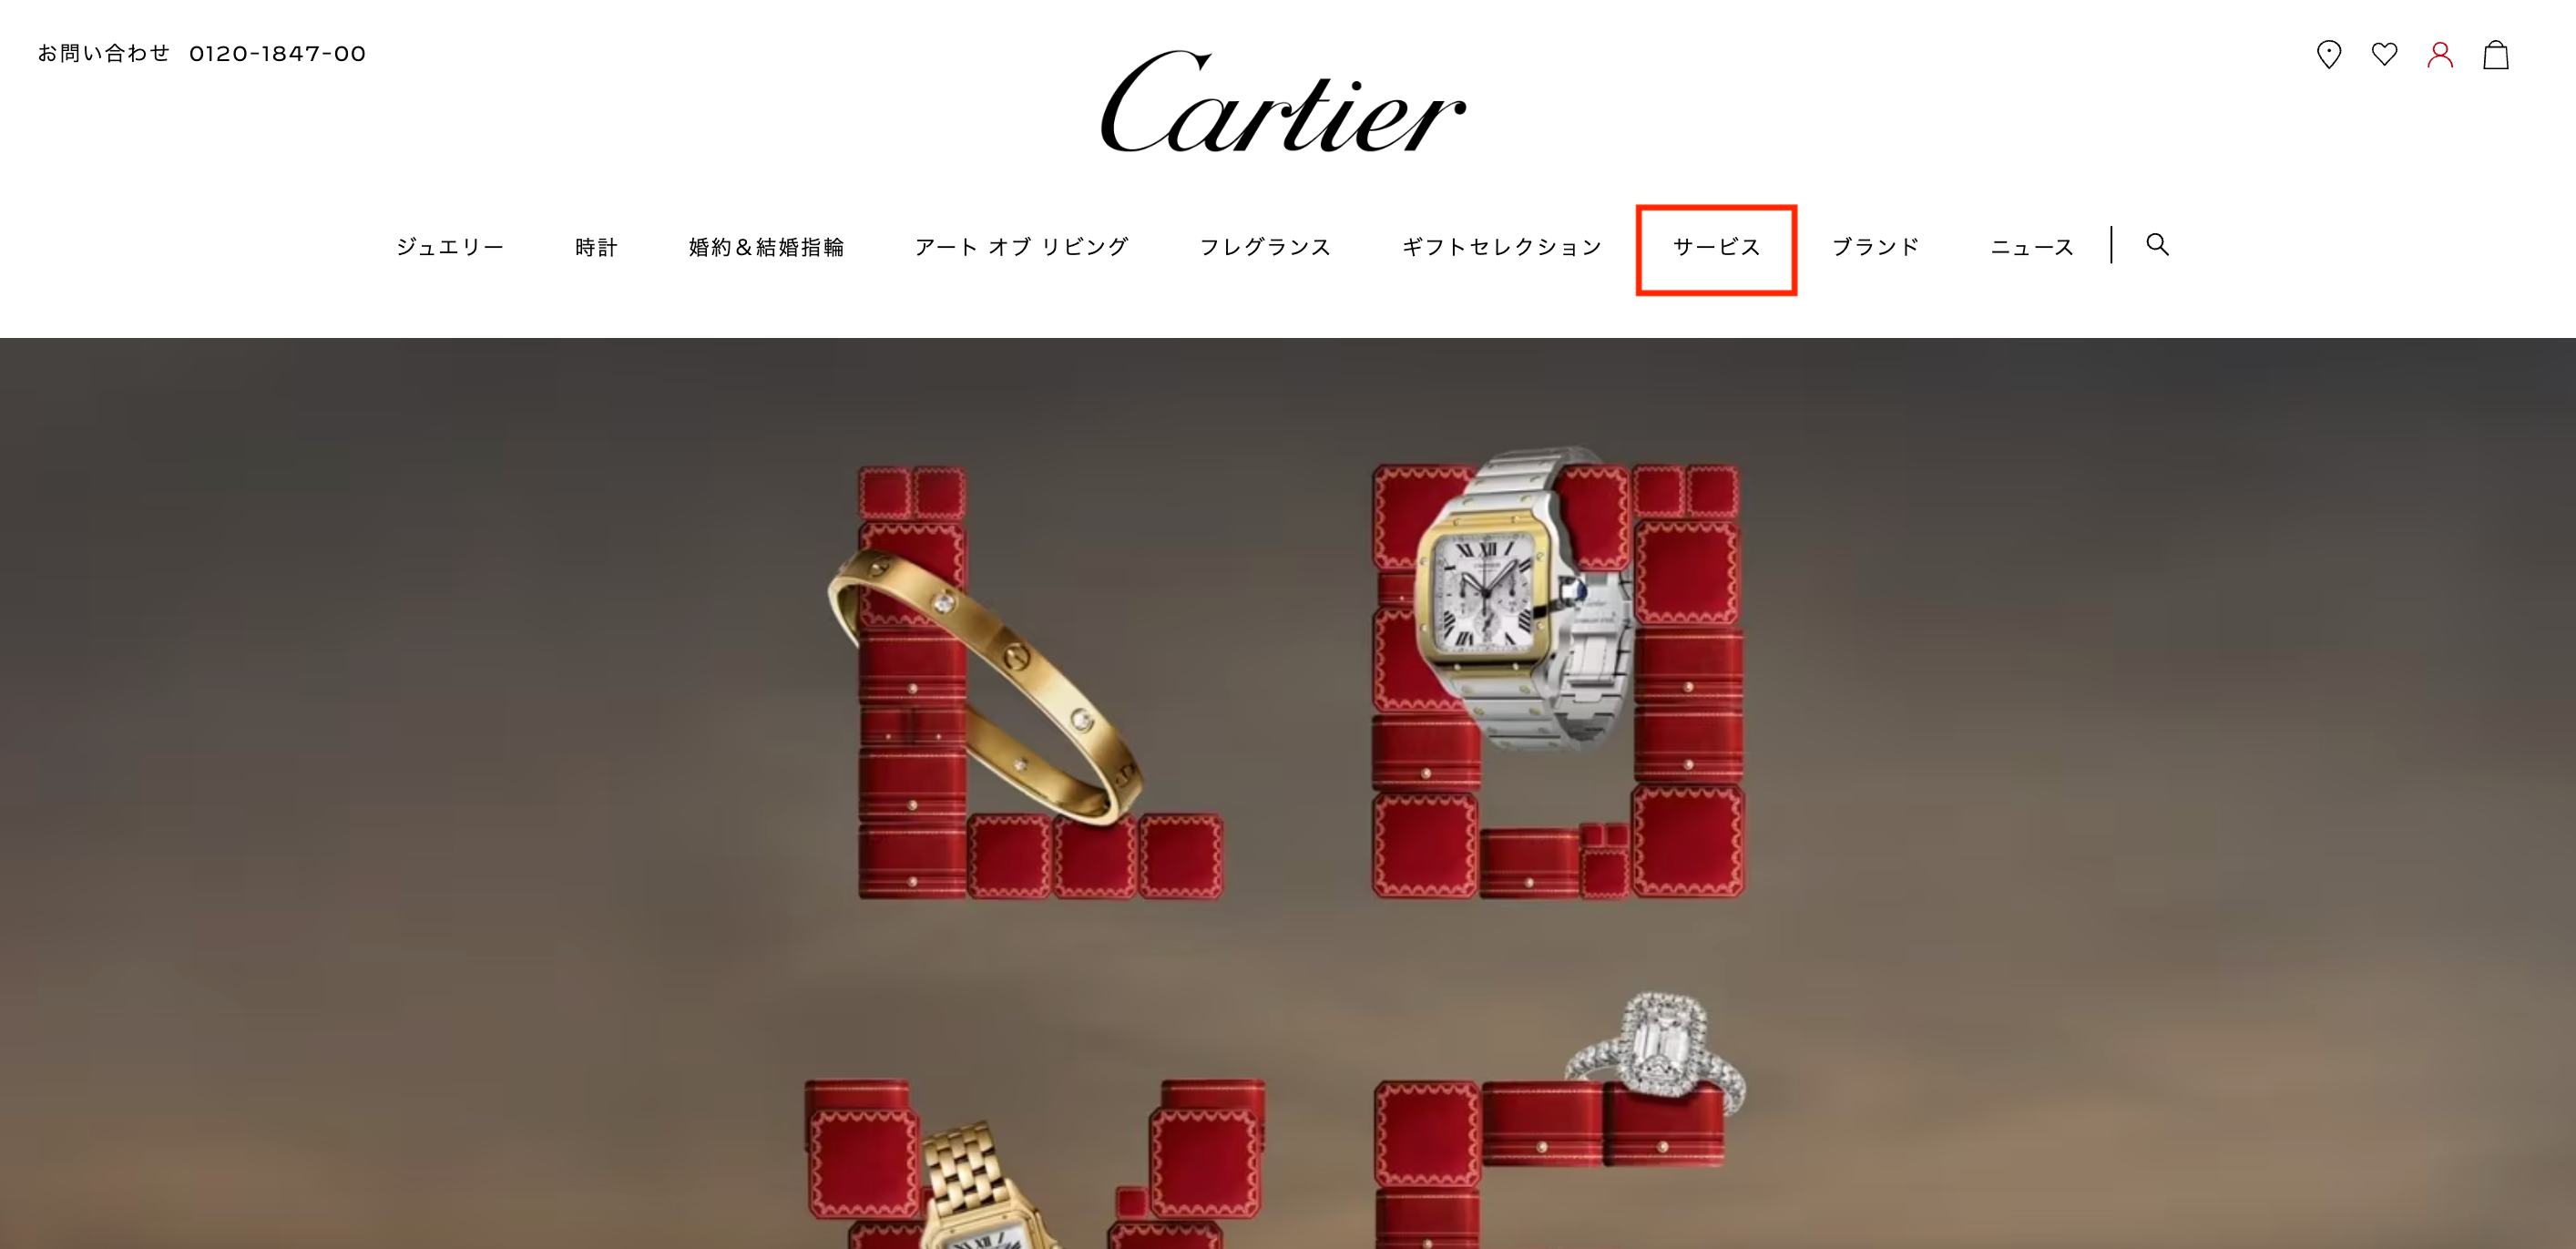 Image from Cartier's official website